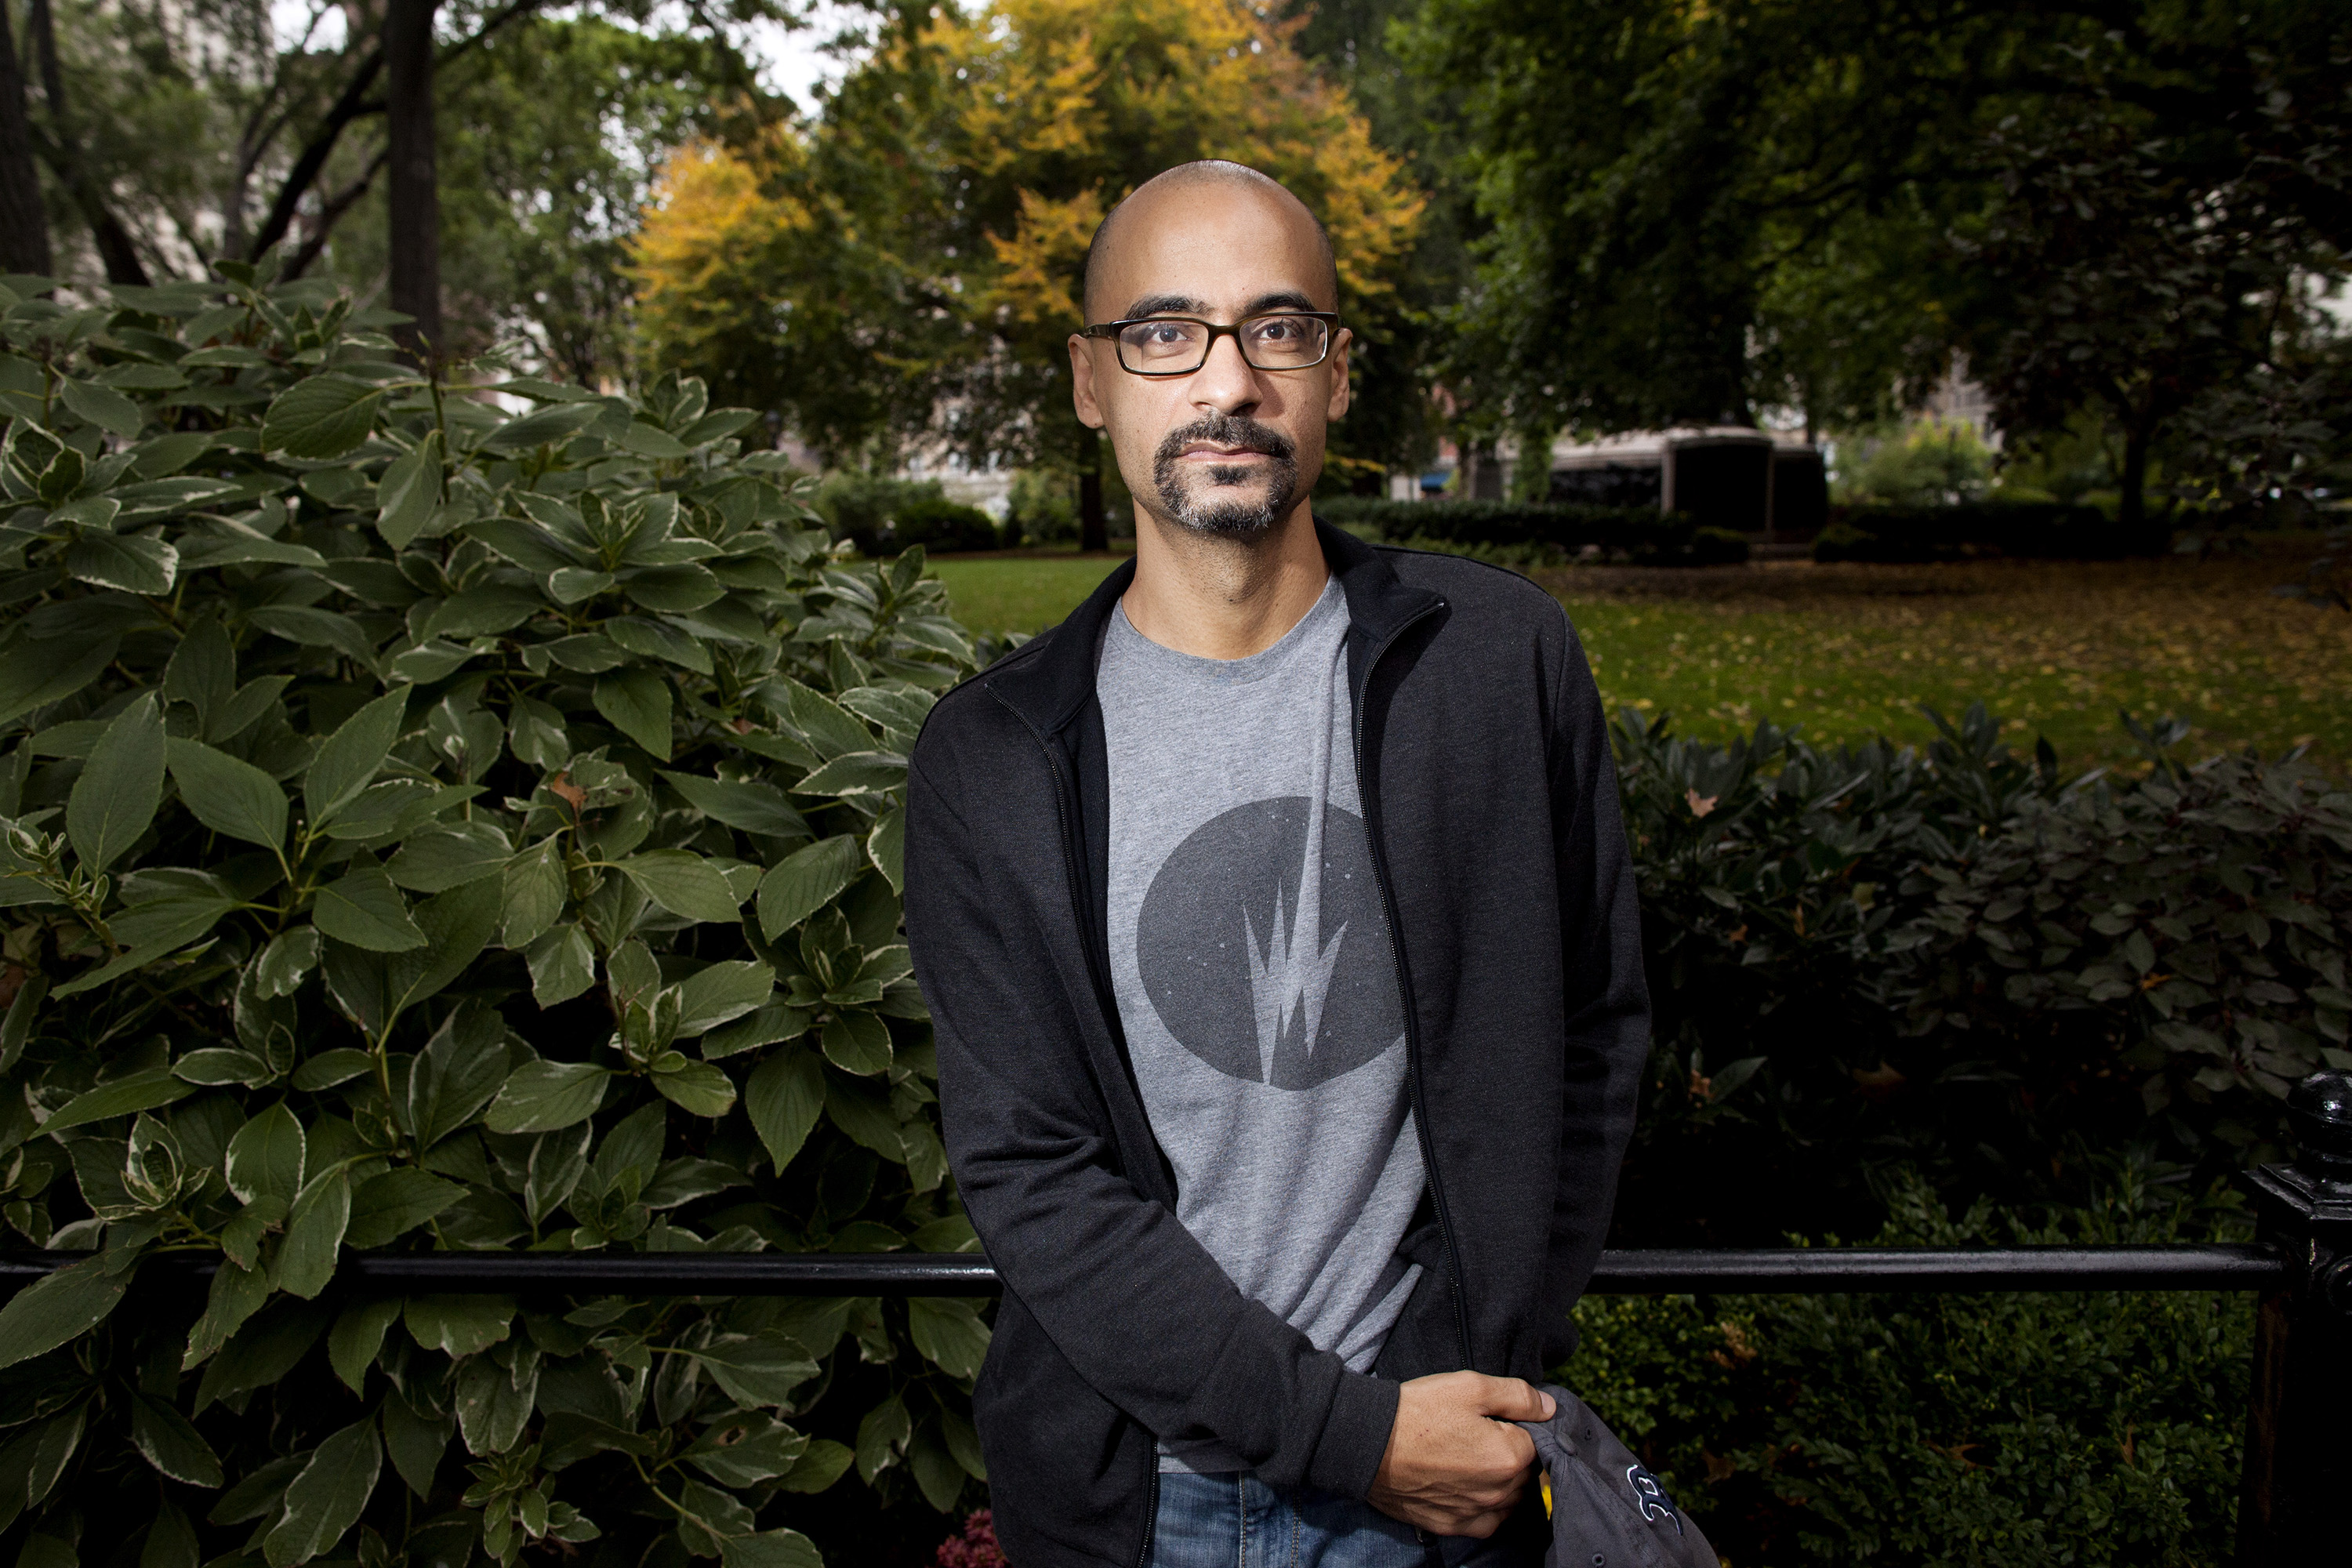 In essay revealing he was raped at age 8, novelist Junot Diaz shines light on male sexual assault